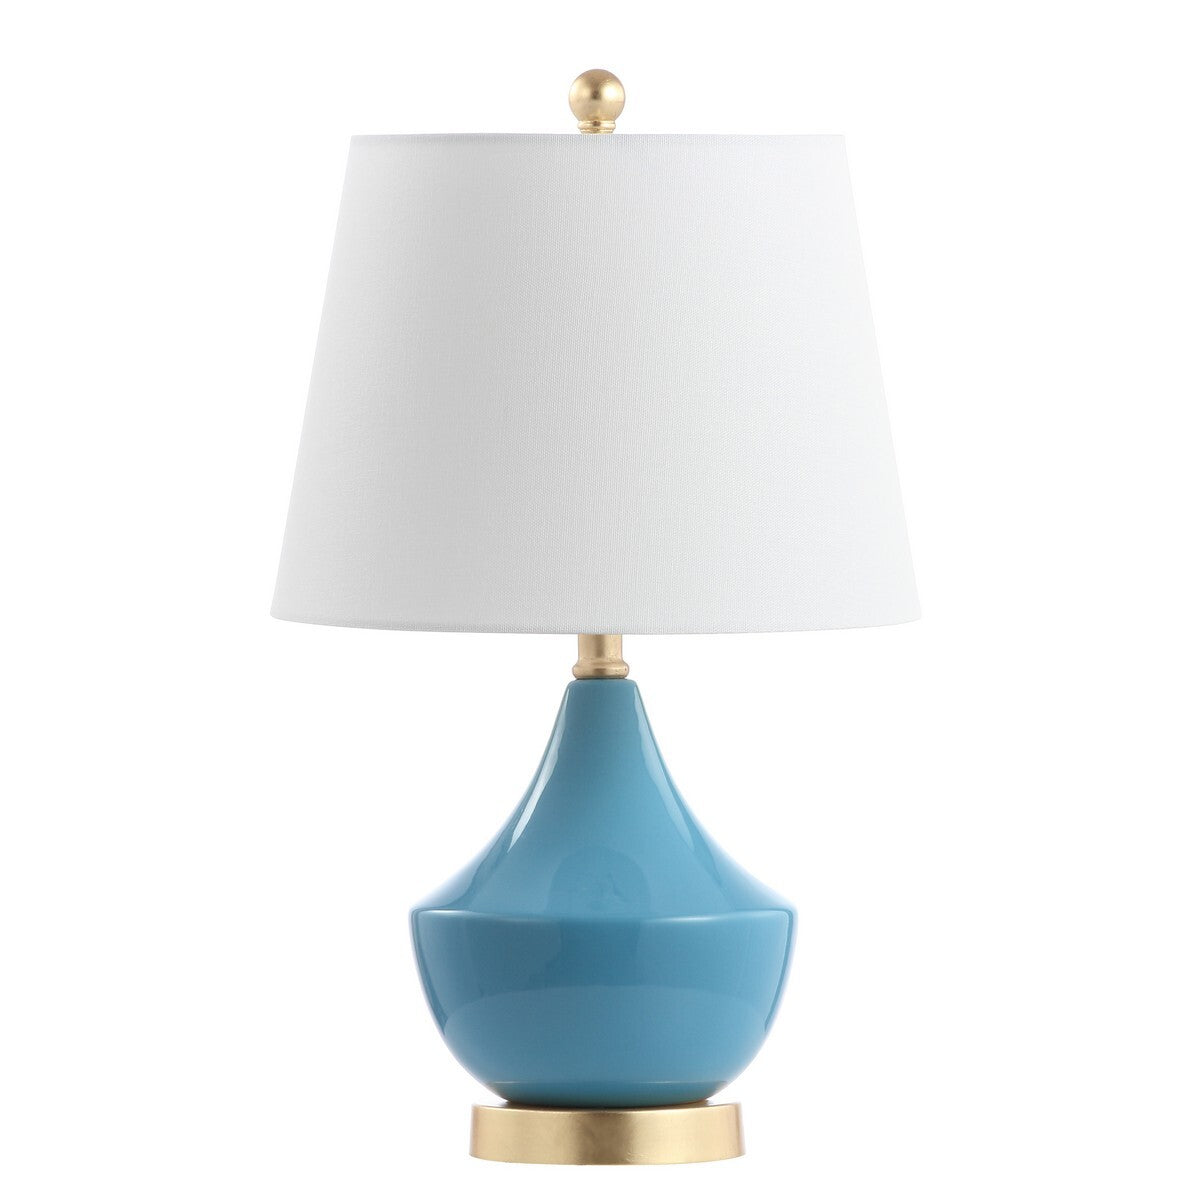 Cerulean Blue Genie Table Lamp by Kevin Francis Design | Luxury Home Decor